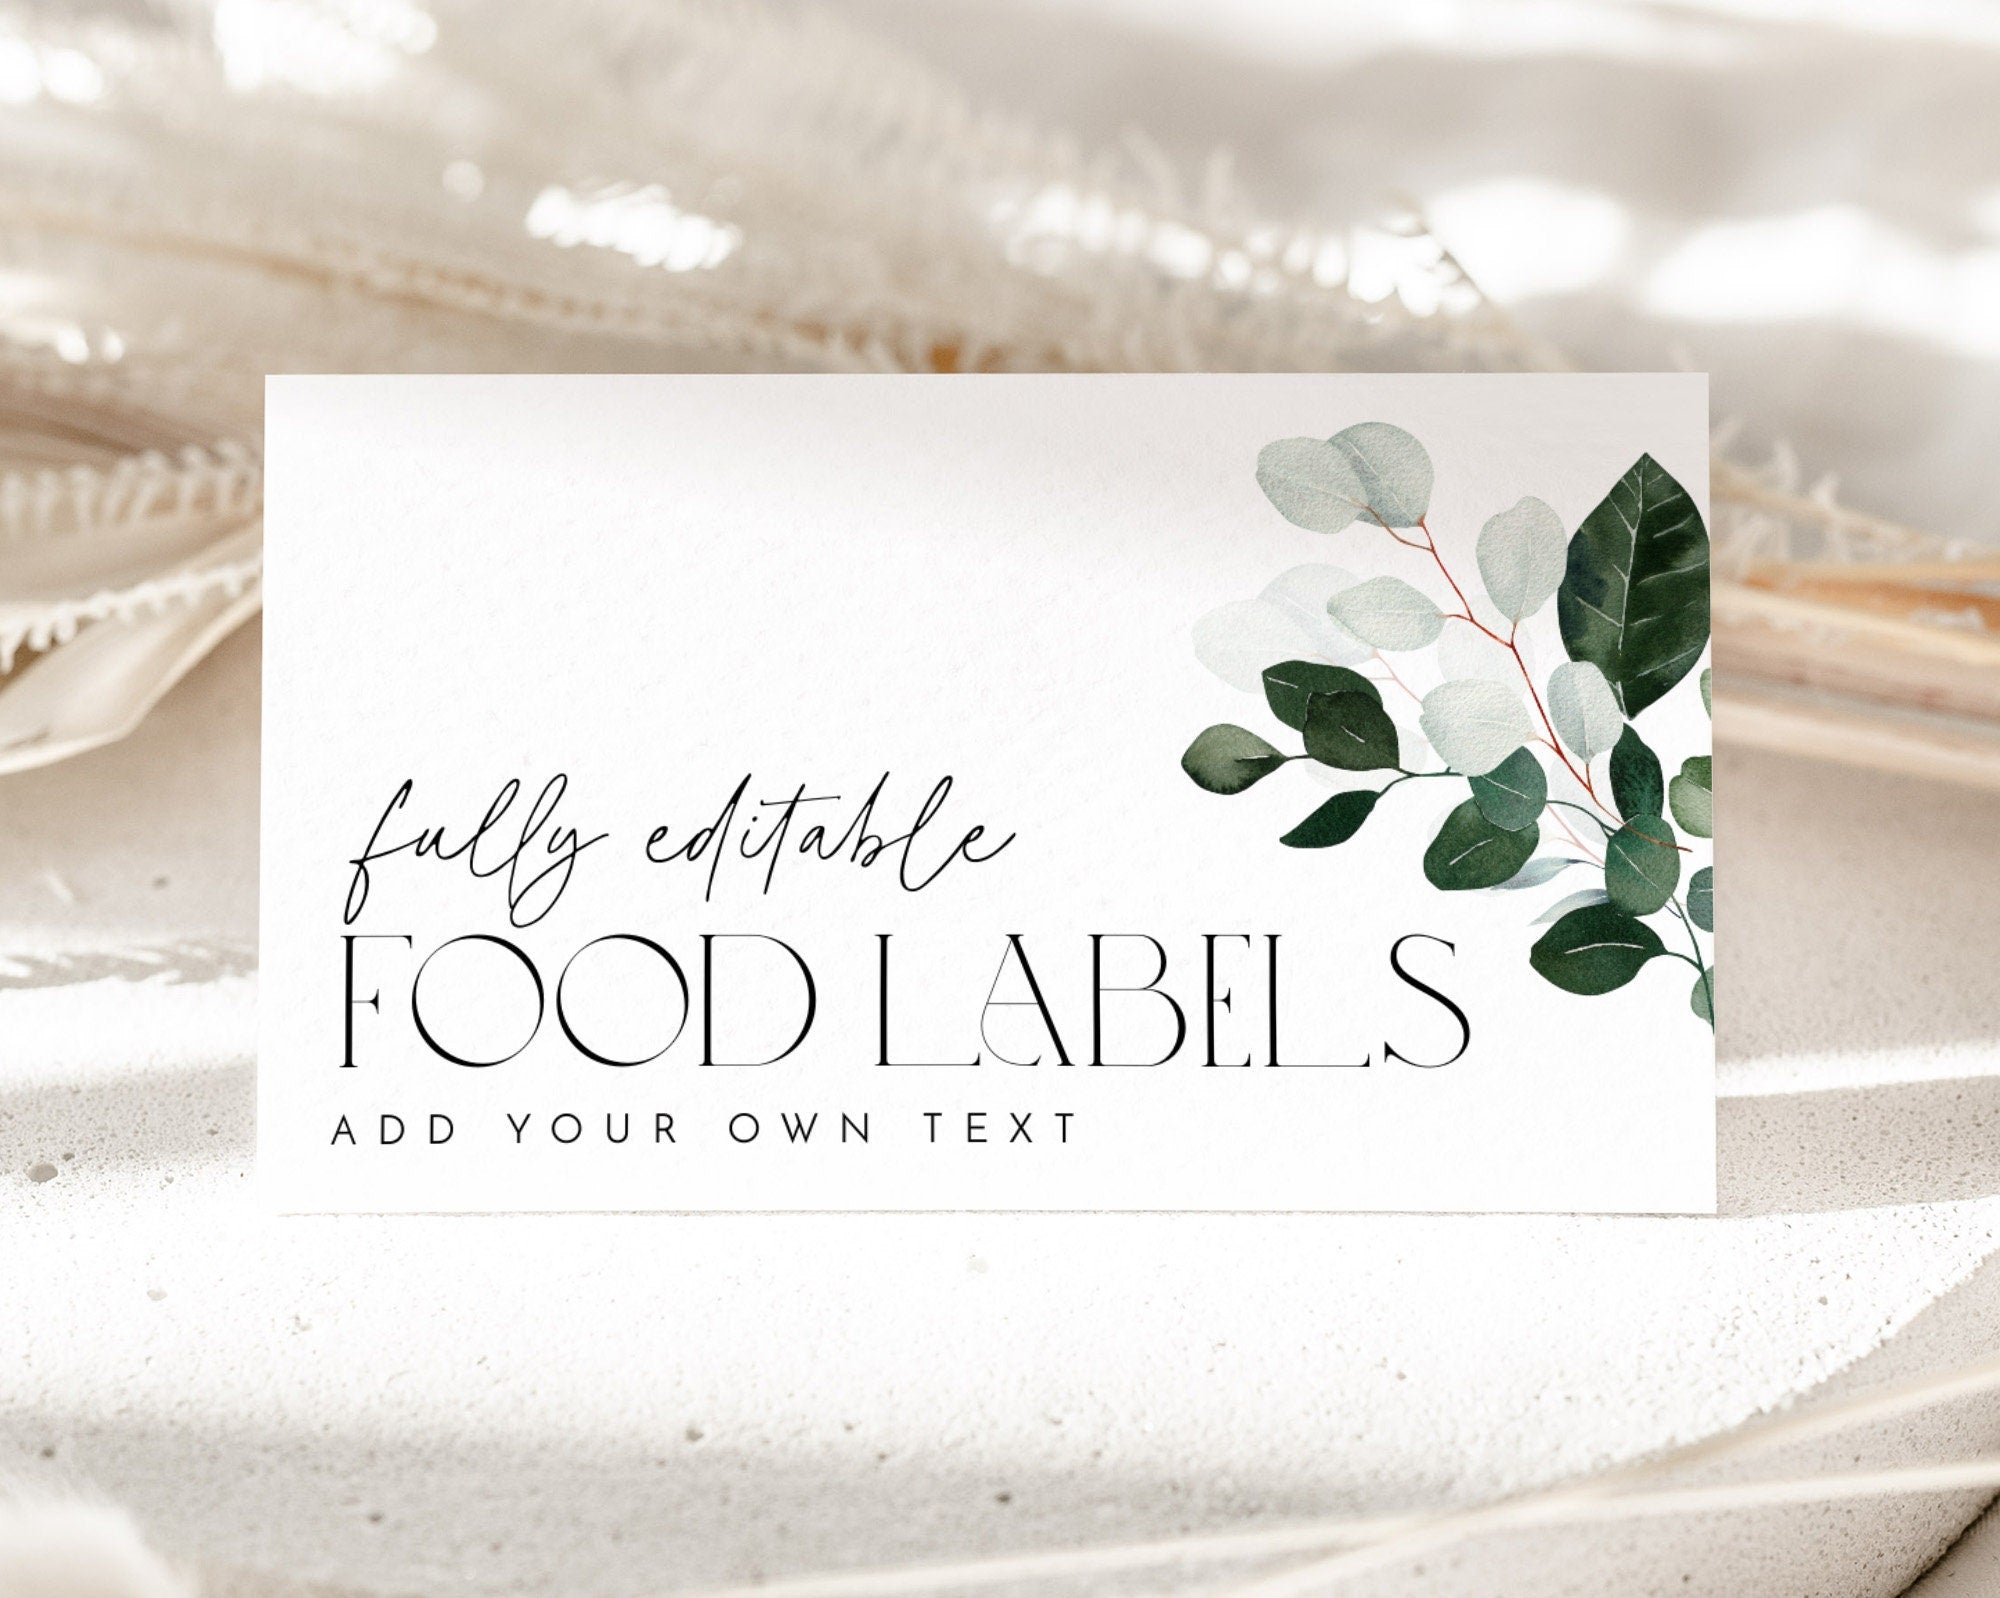 Bridal Shower Food Labels, Greenery Food Label Card, Food Tent Cards, Food Tags, Food Labels, Folded Food Cards, Tented, Greenery Food Label